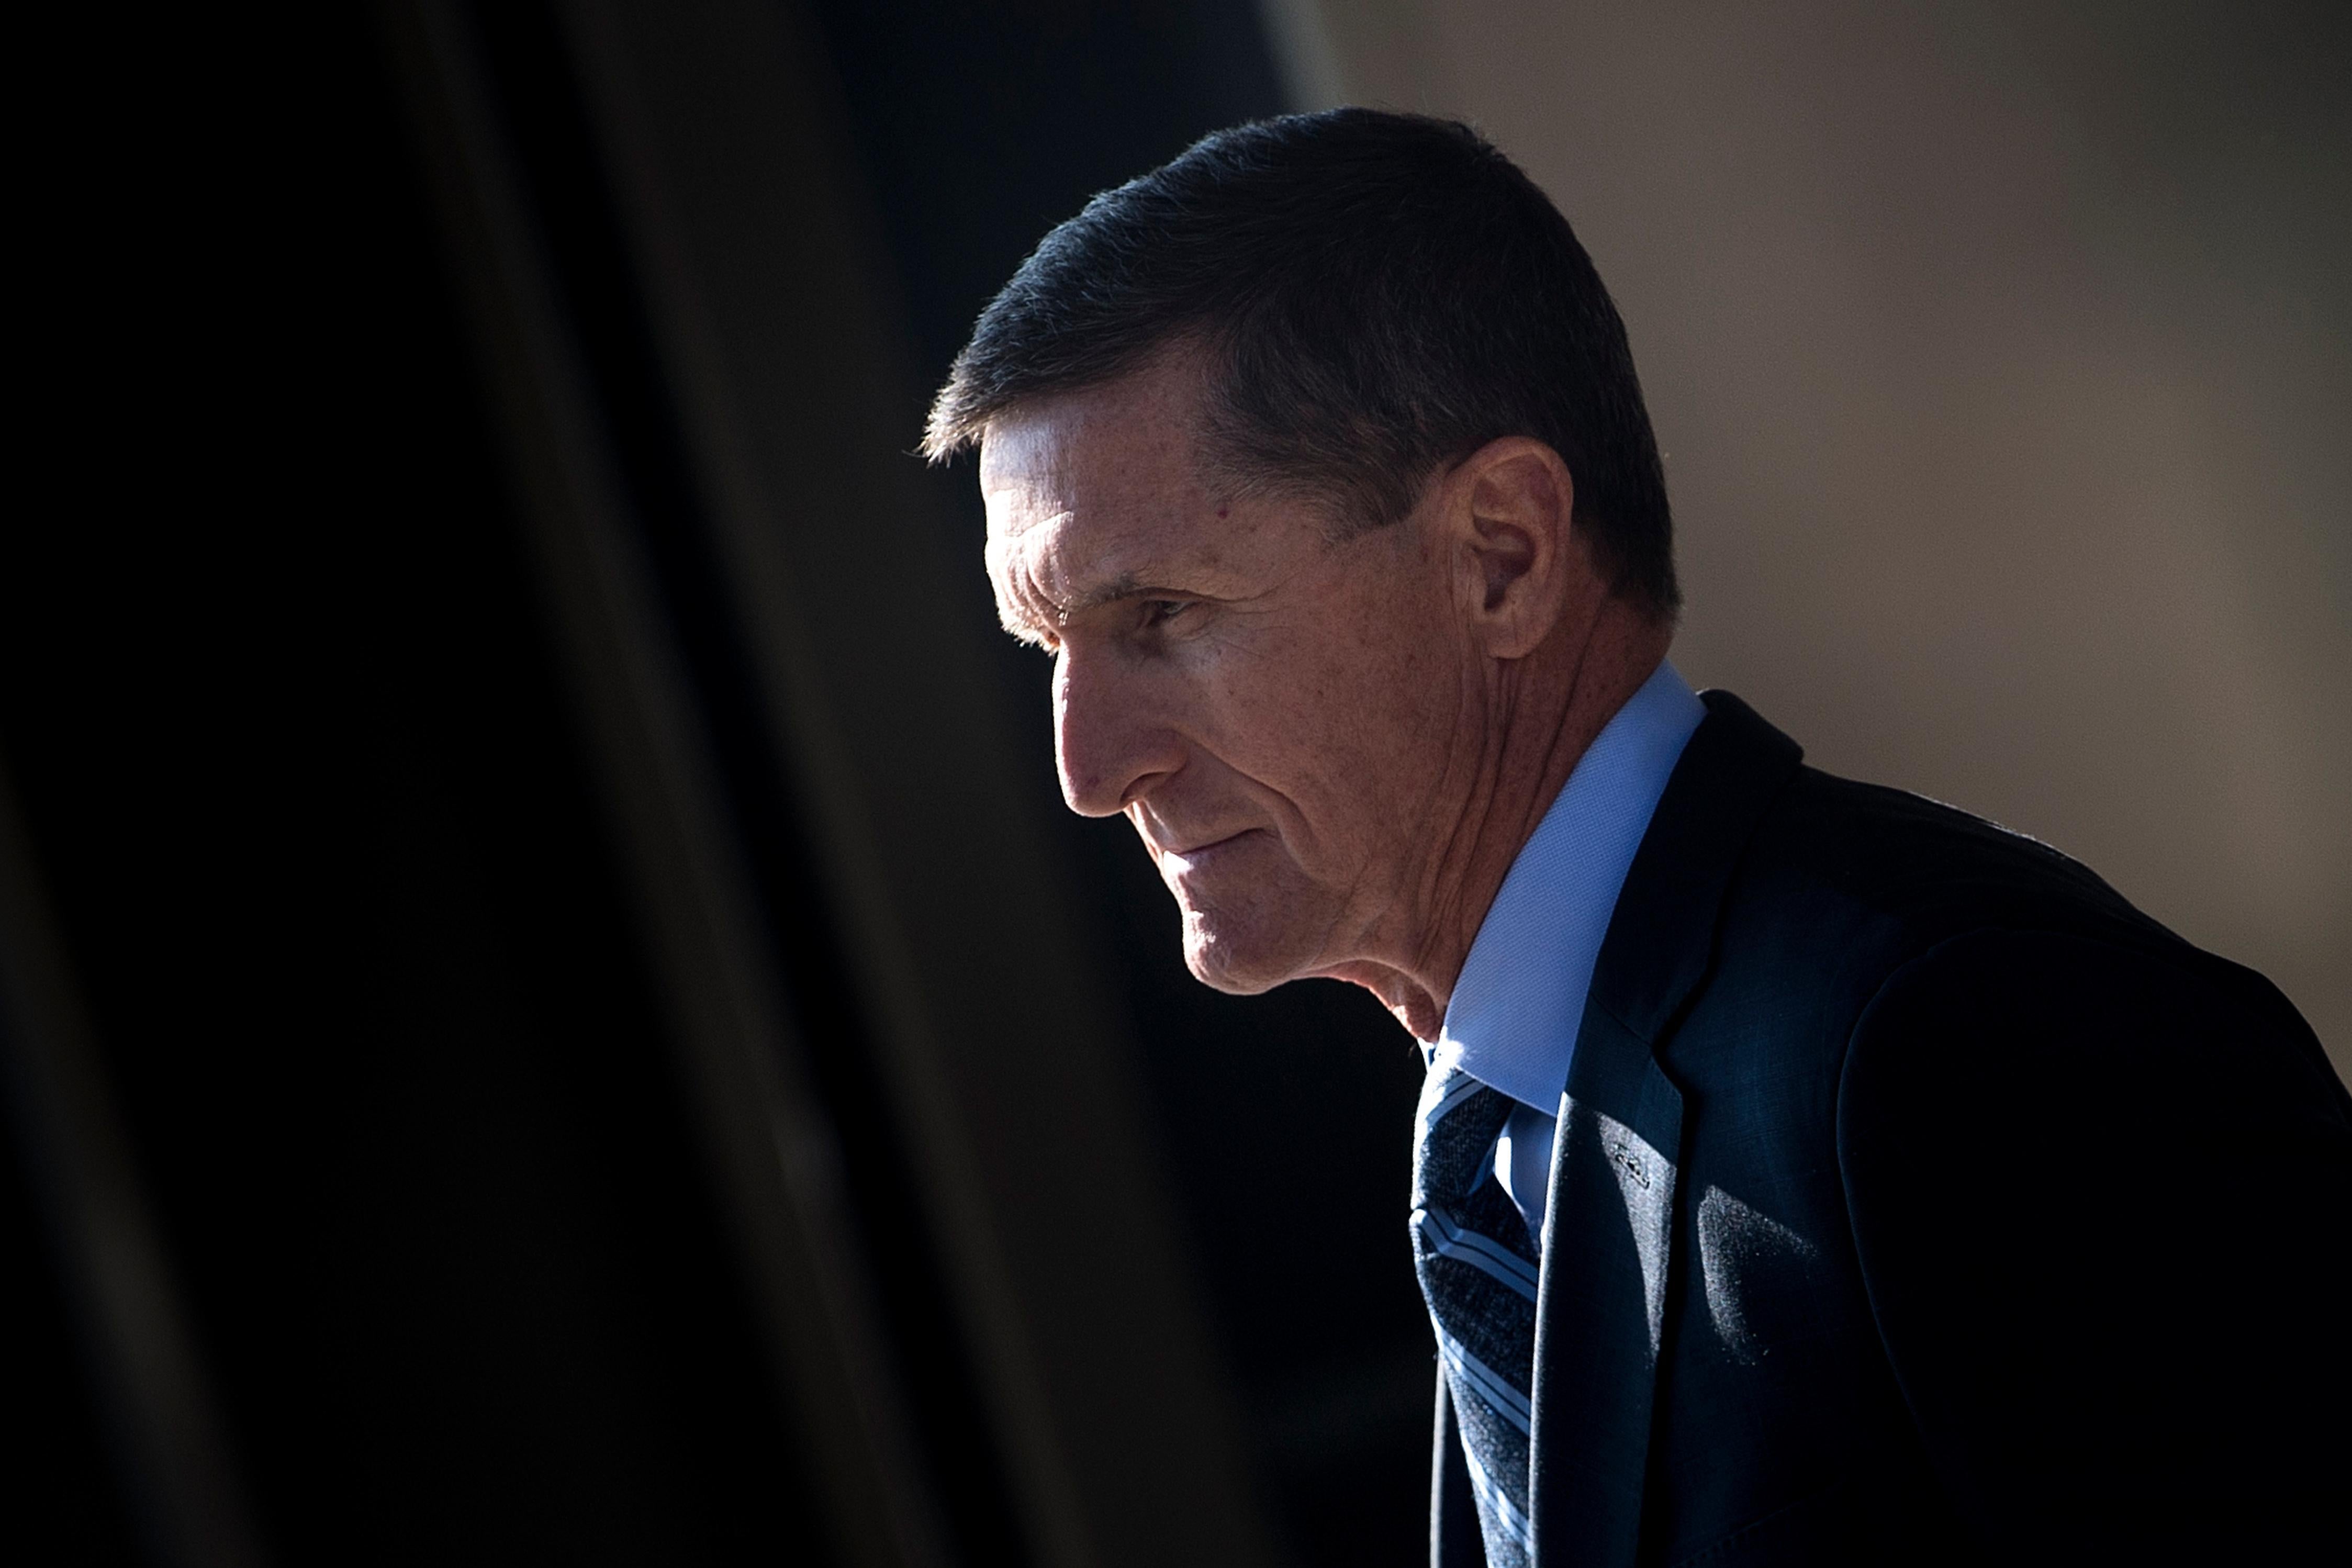 A close-up of Flynn walking away with a blank expression on his face.